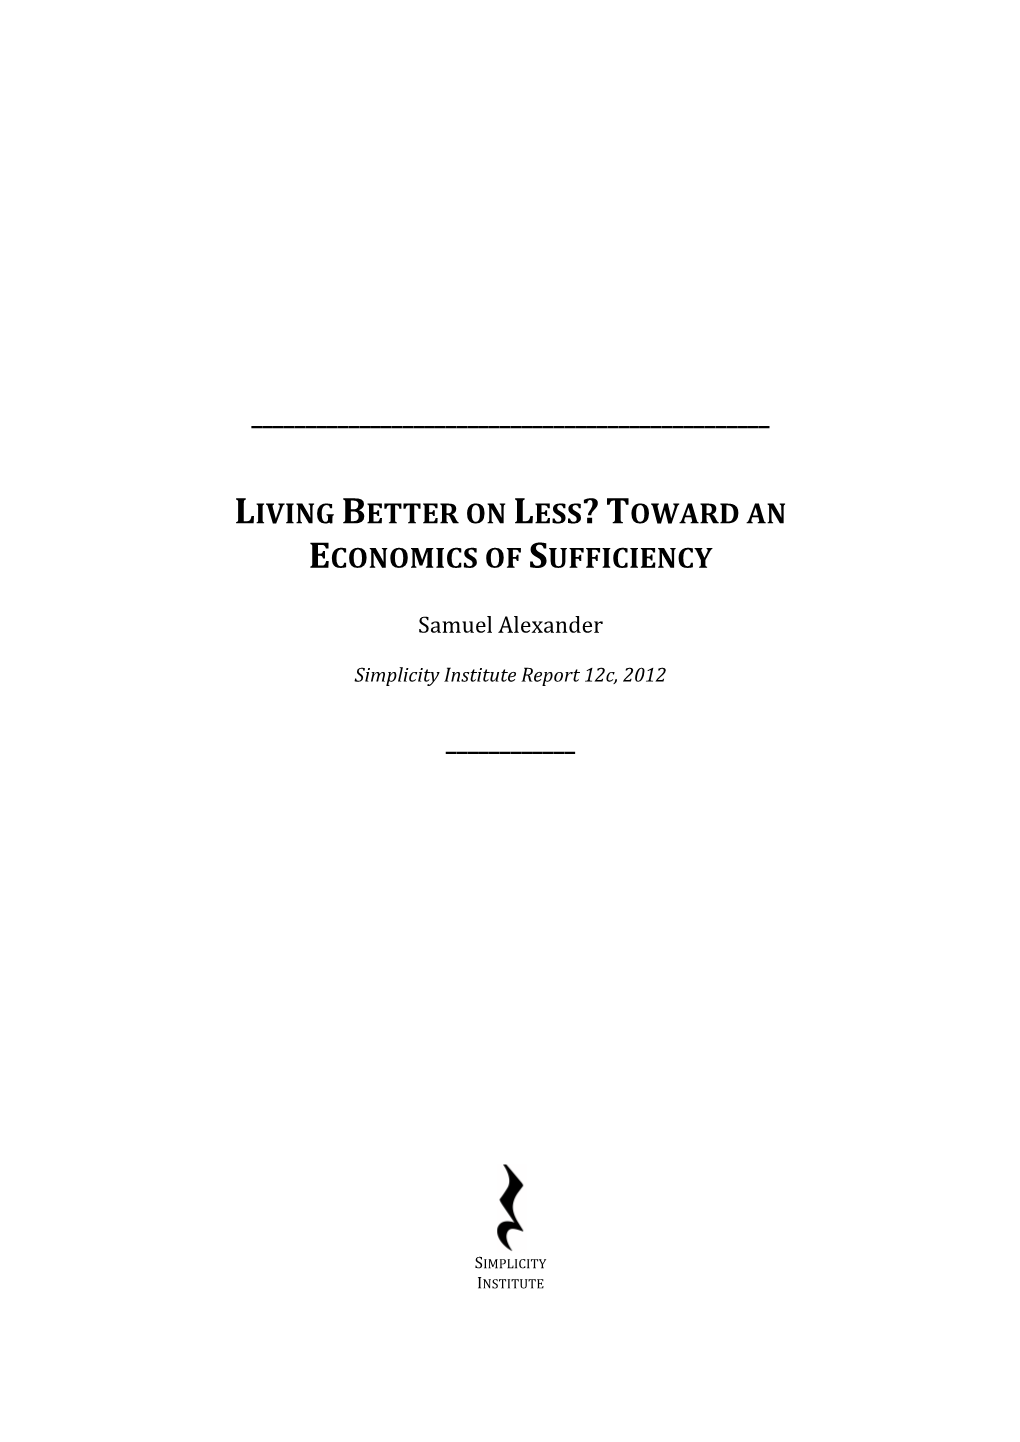 Living Better on Less? Toward an Economics of Sufficiency